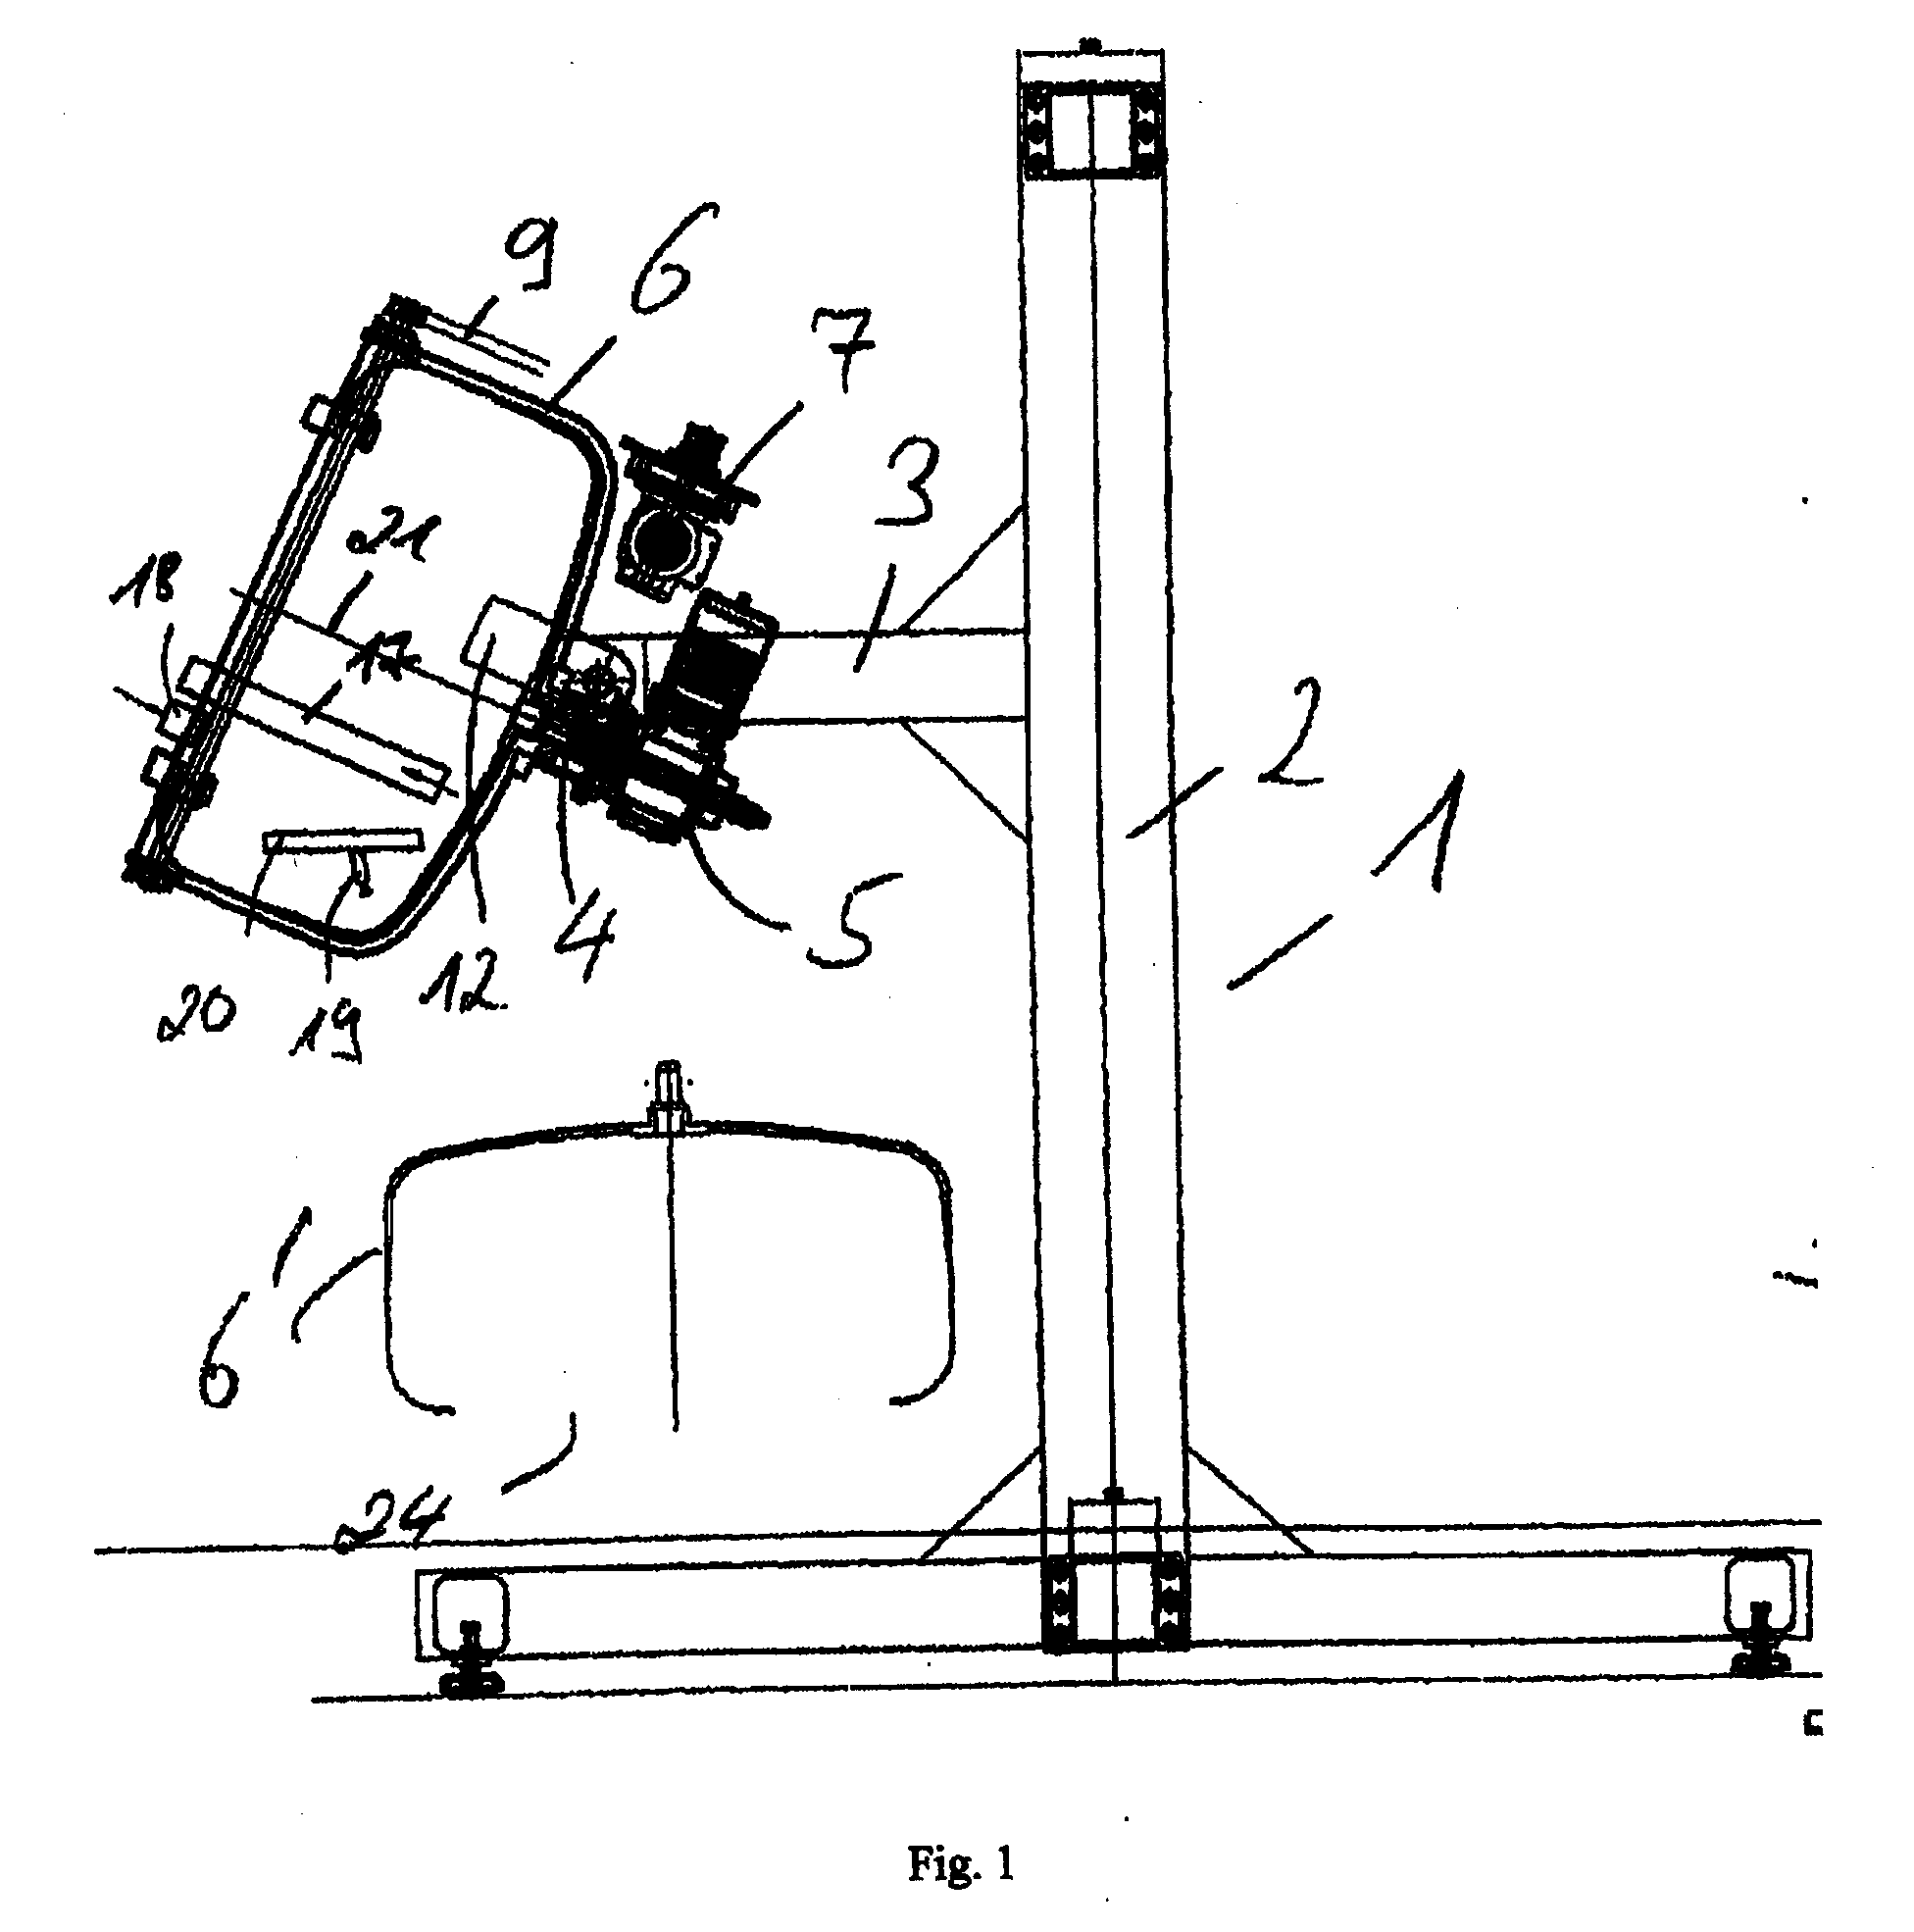 Device and method for coating small parts